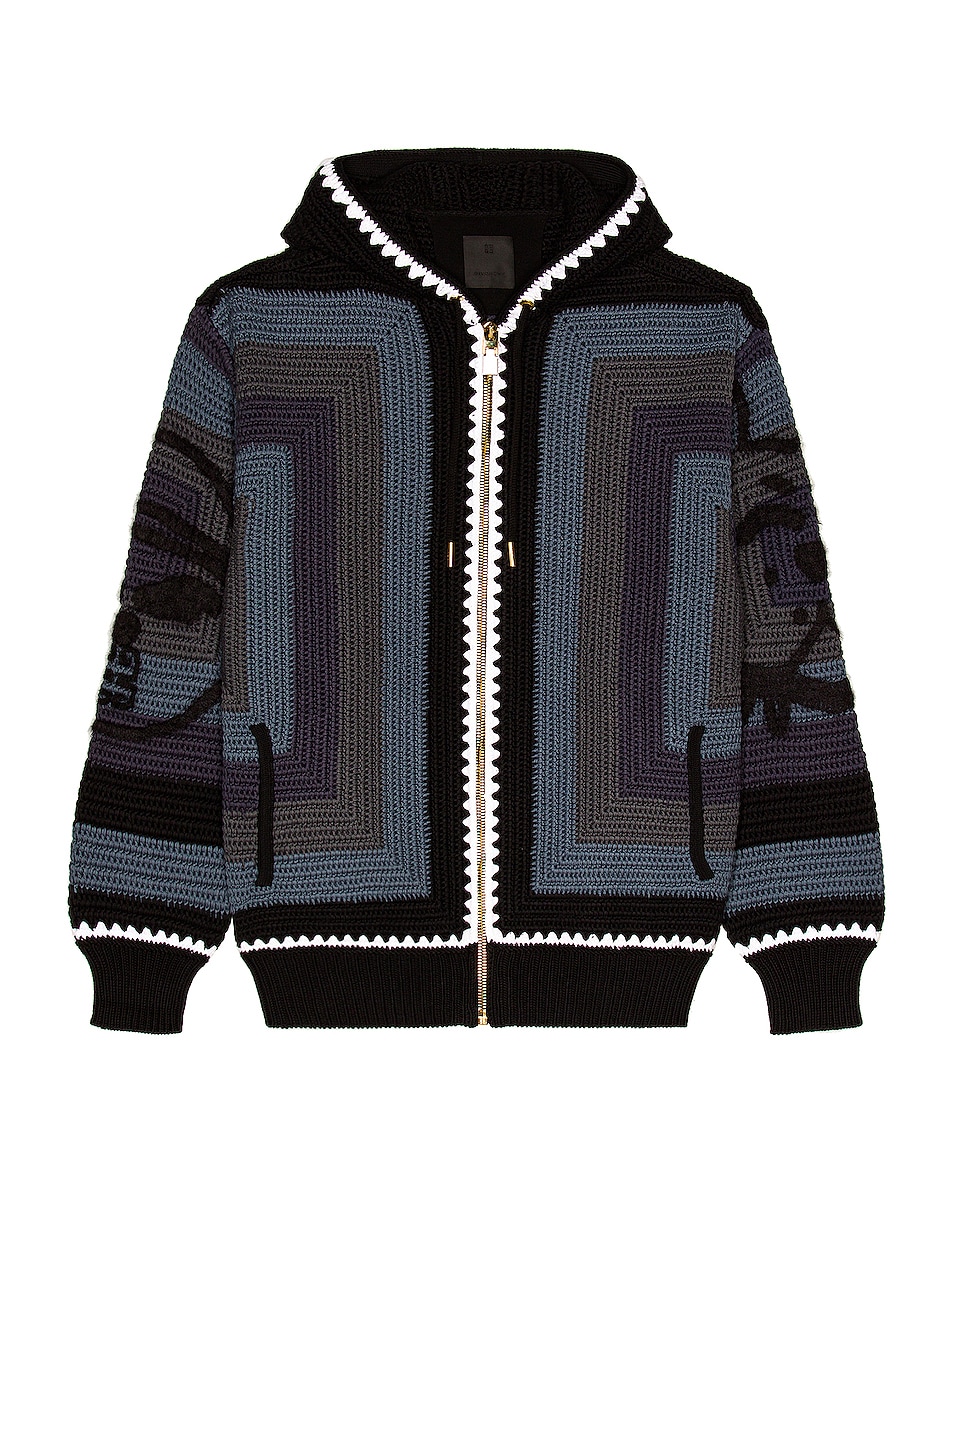 Image 1 of Givenchy Crochet Blouson in Black & Blue